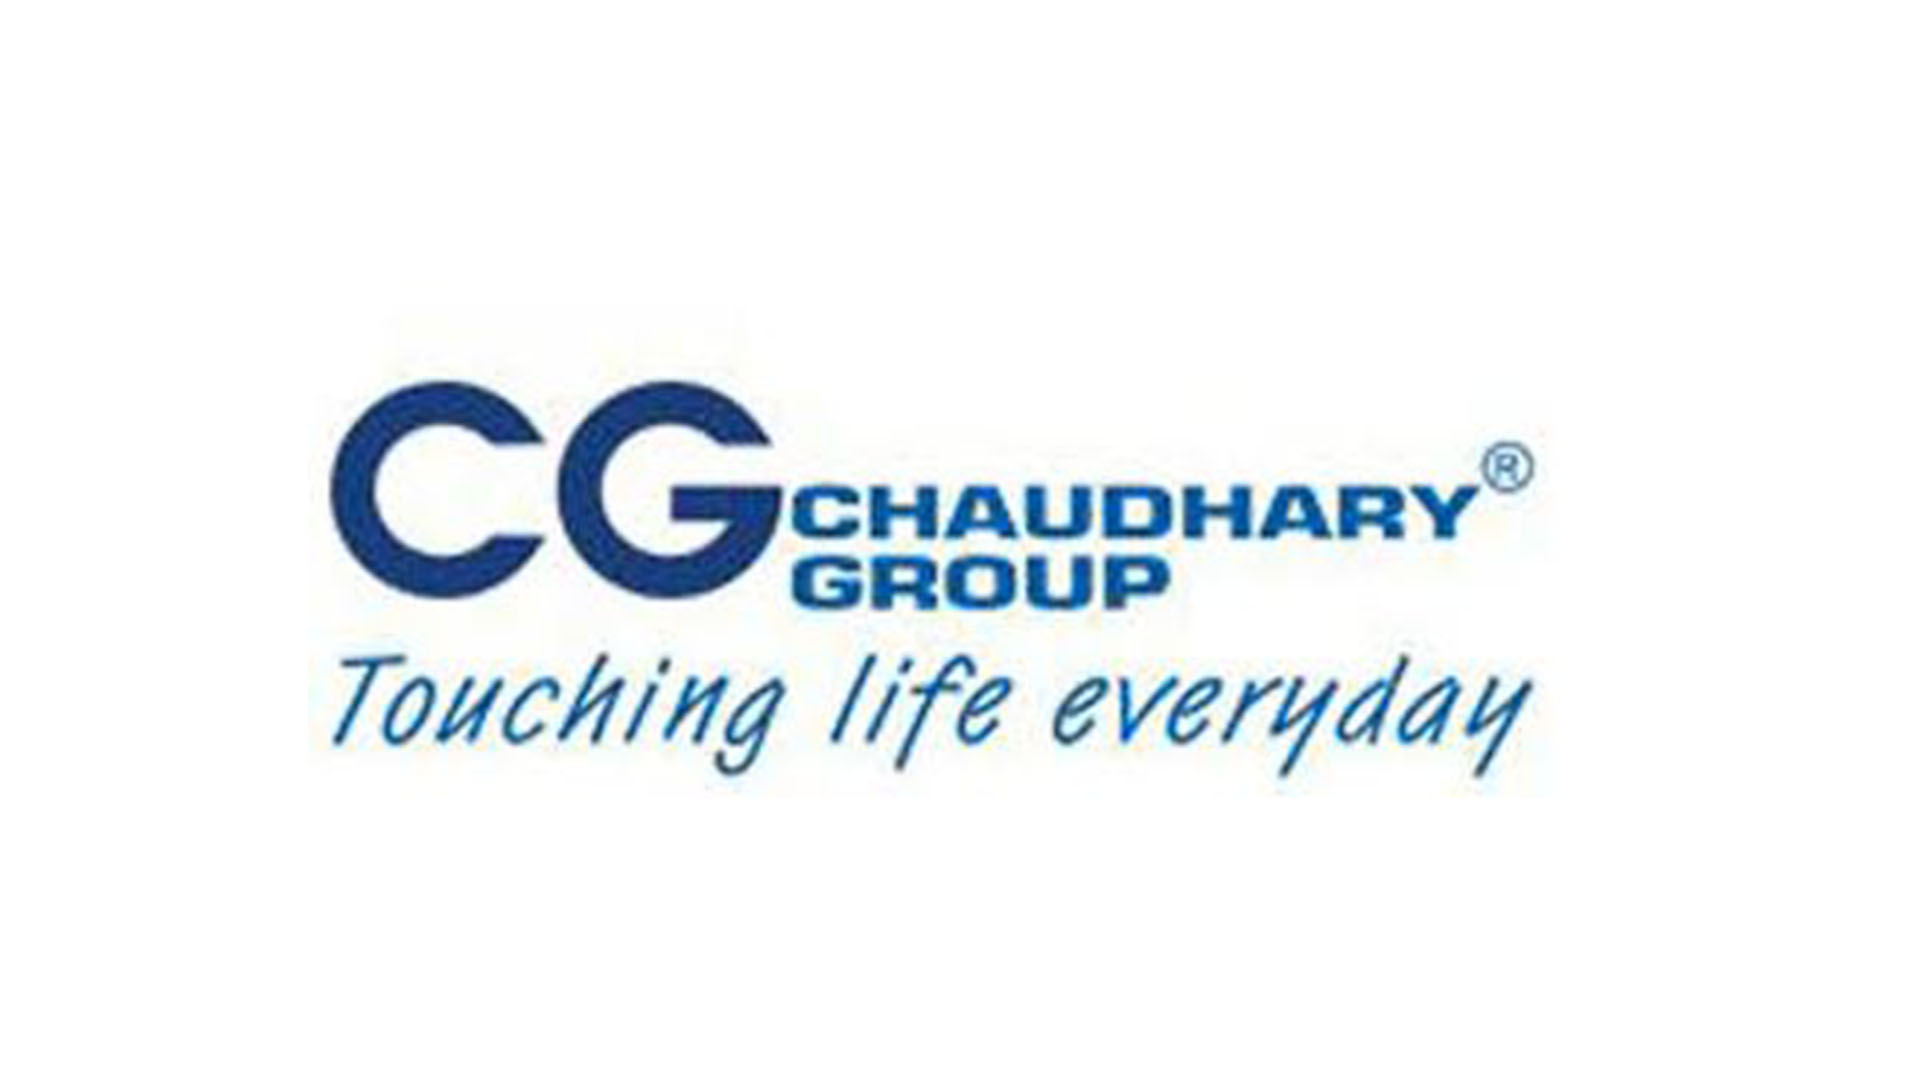 42 members of Chaudhary group’s corona confirmed